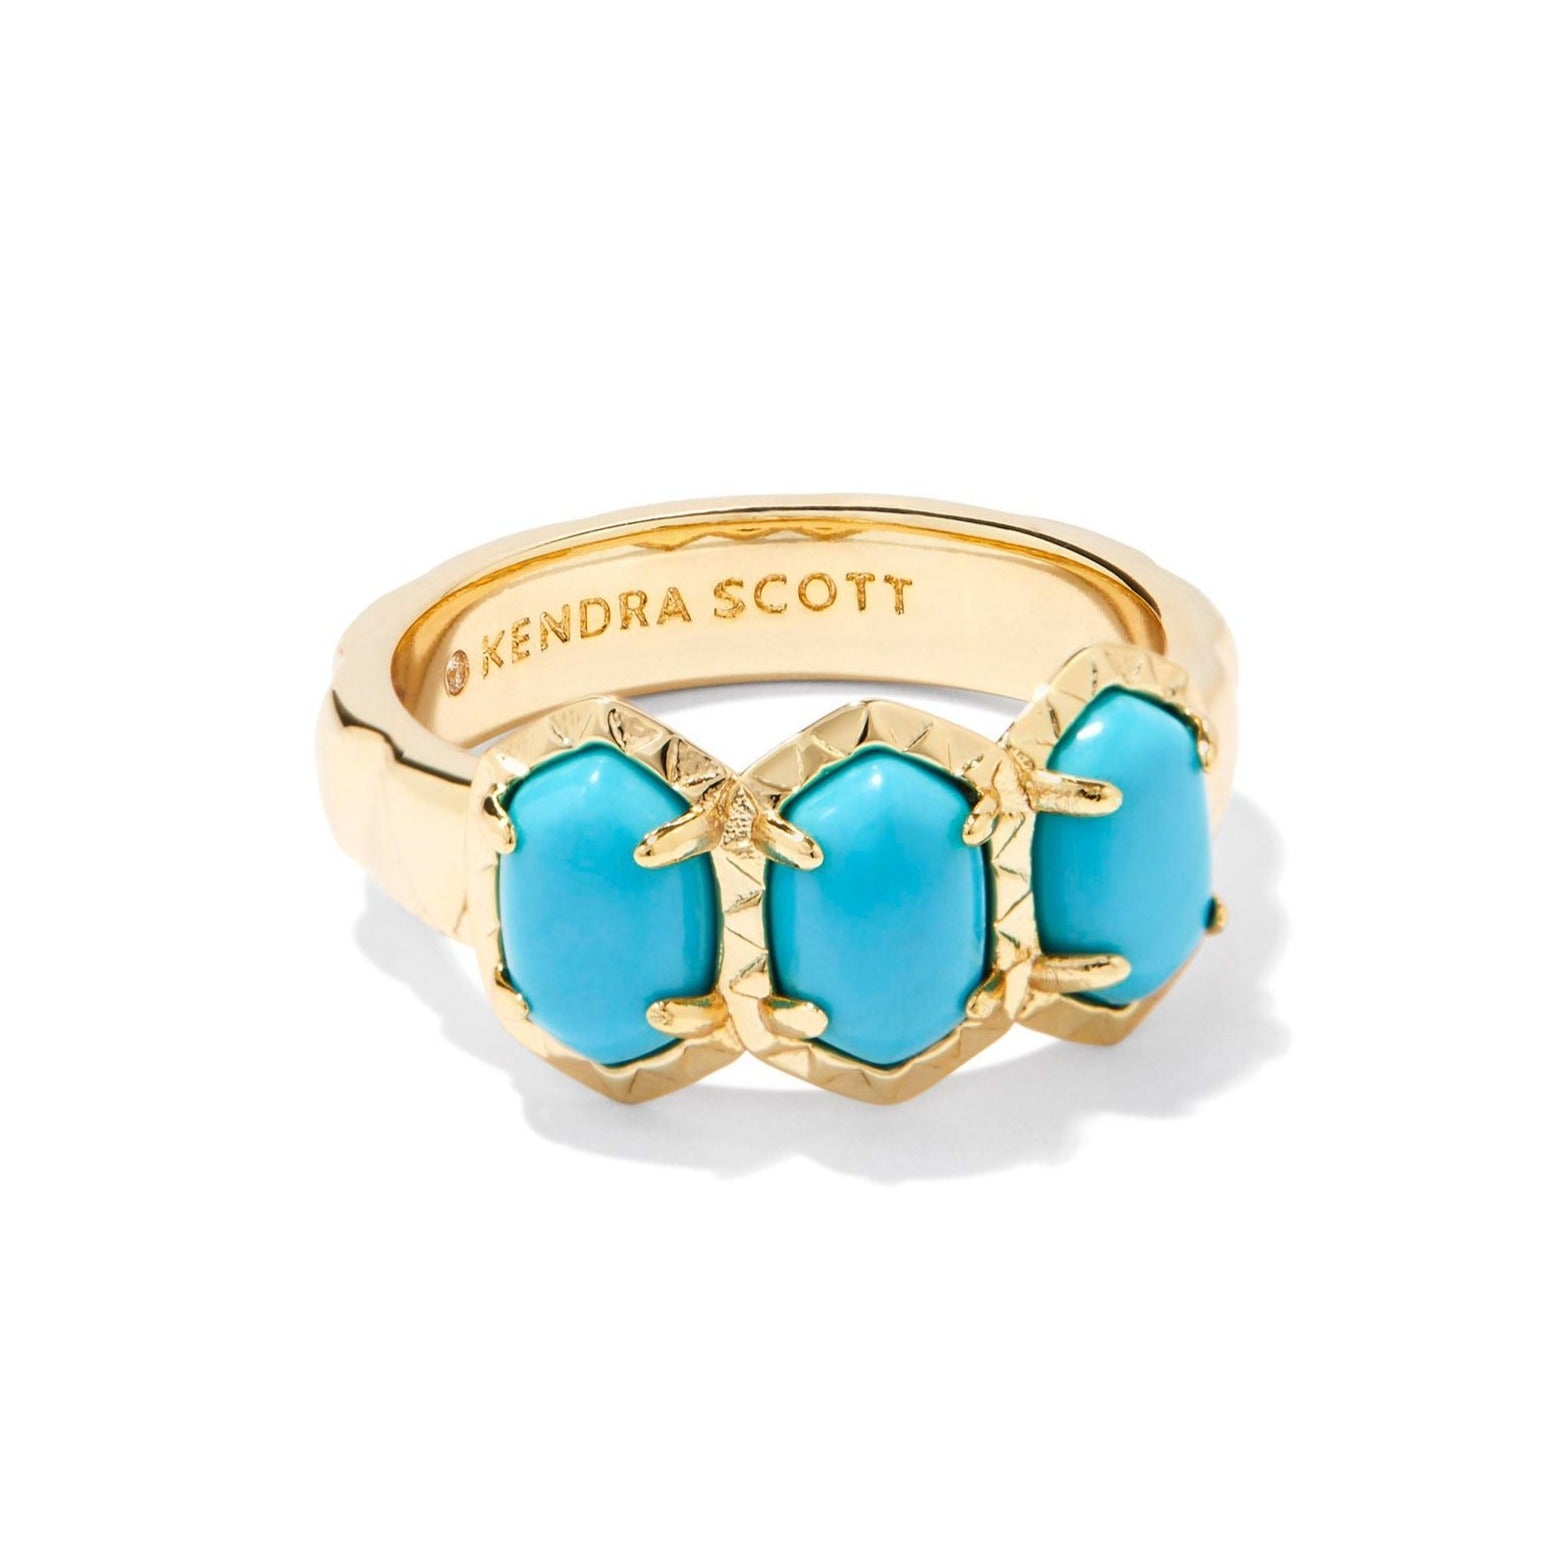 Kendra Scott | Daphne Gold Band Ring in Variegated Turquoise Magnesite - Giddy Up Glamour Boutique